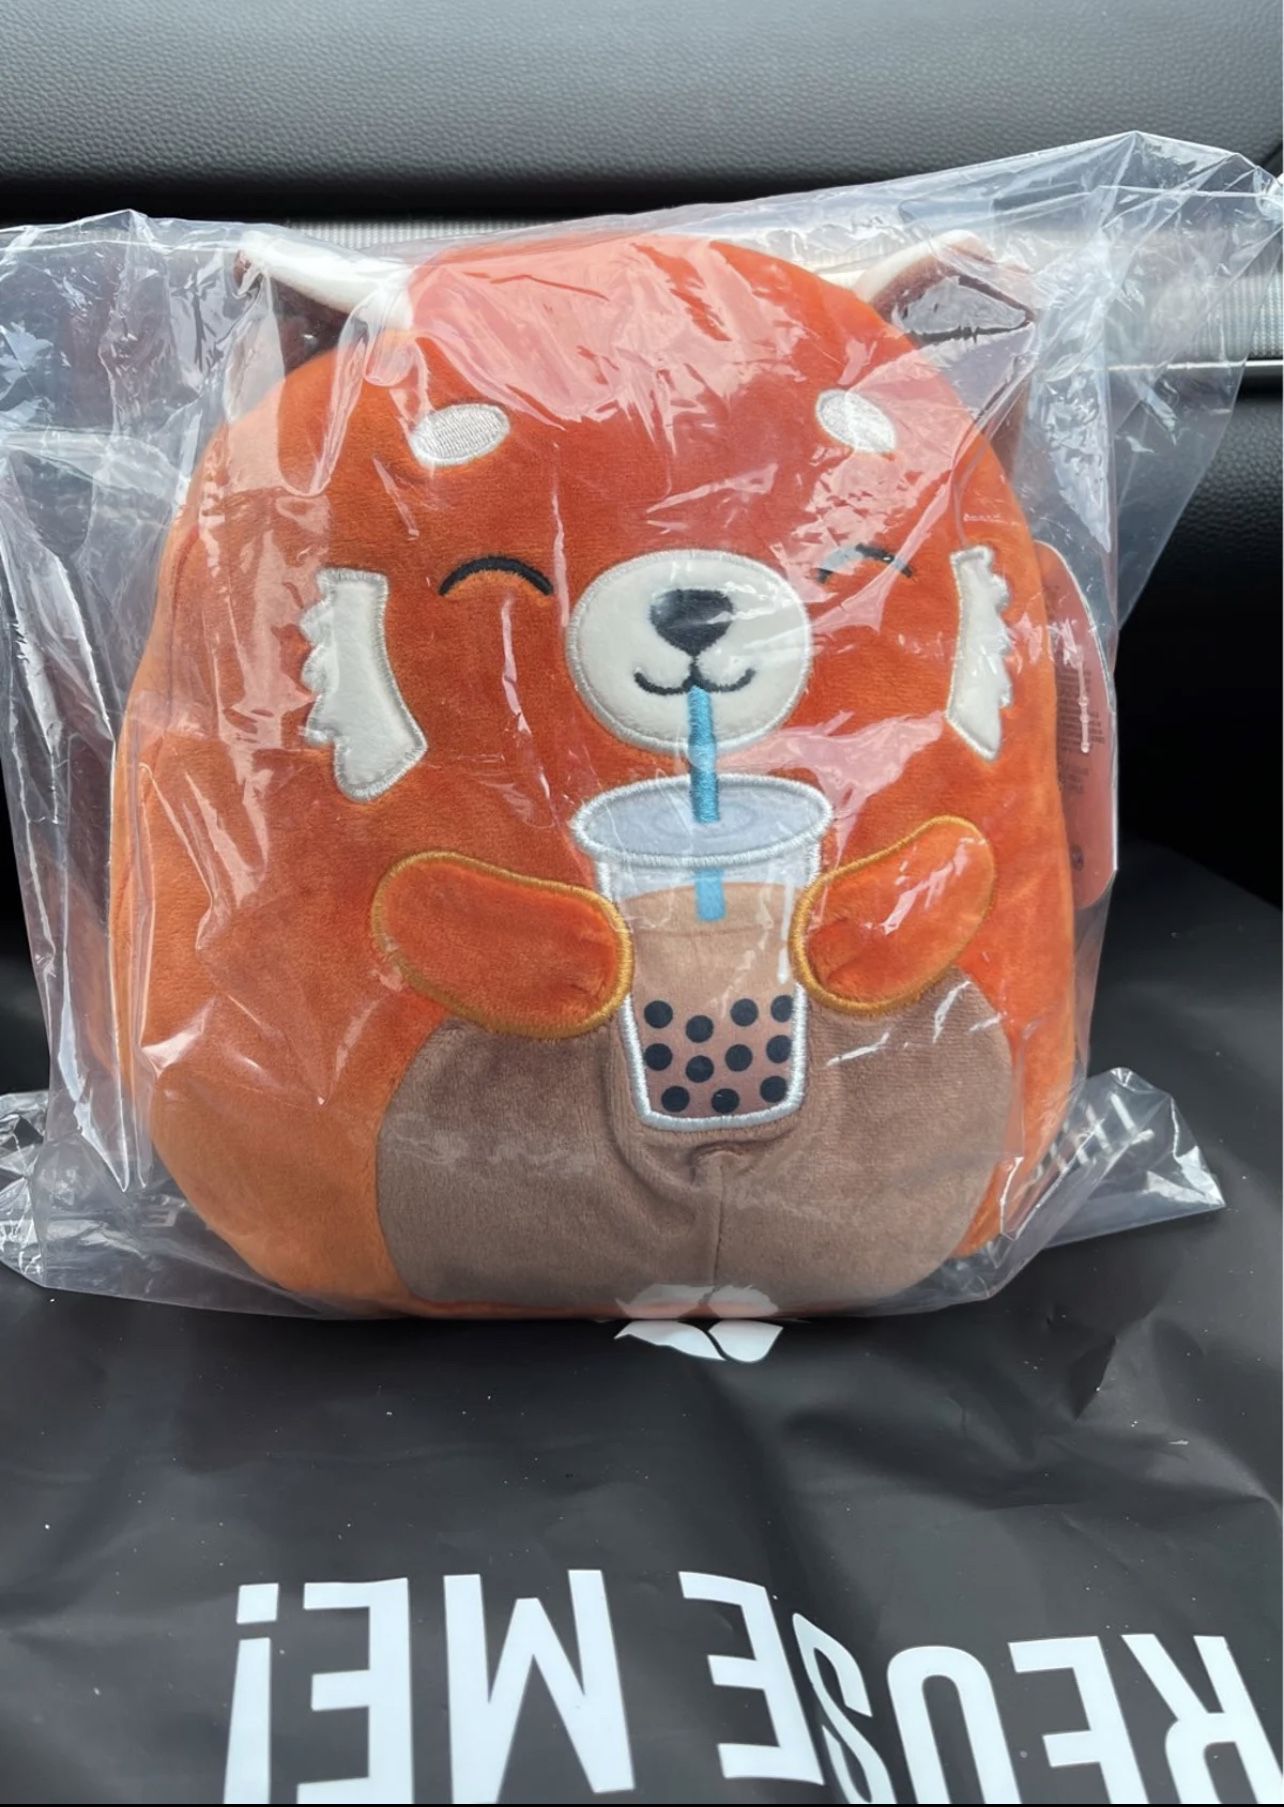 Squishmallow Seth The Red Panda With Boba 8 Hot Topic Exclusive Sealed Bnwt For Sale In Alhambra Ca Offerup